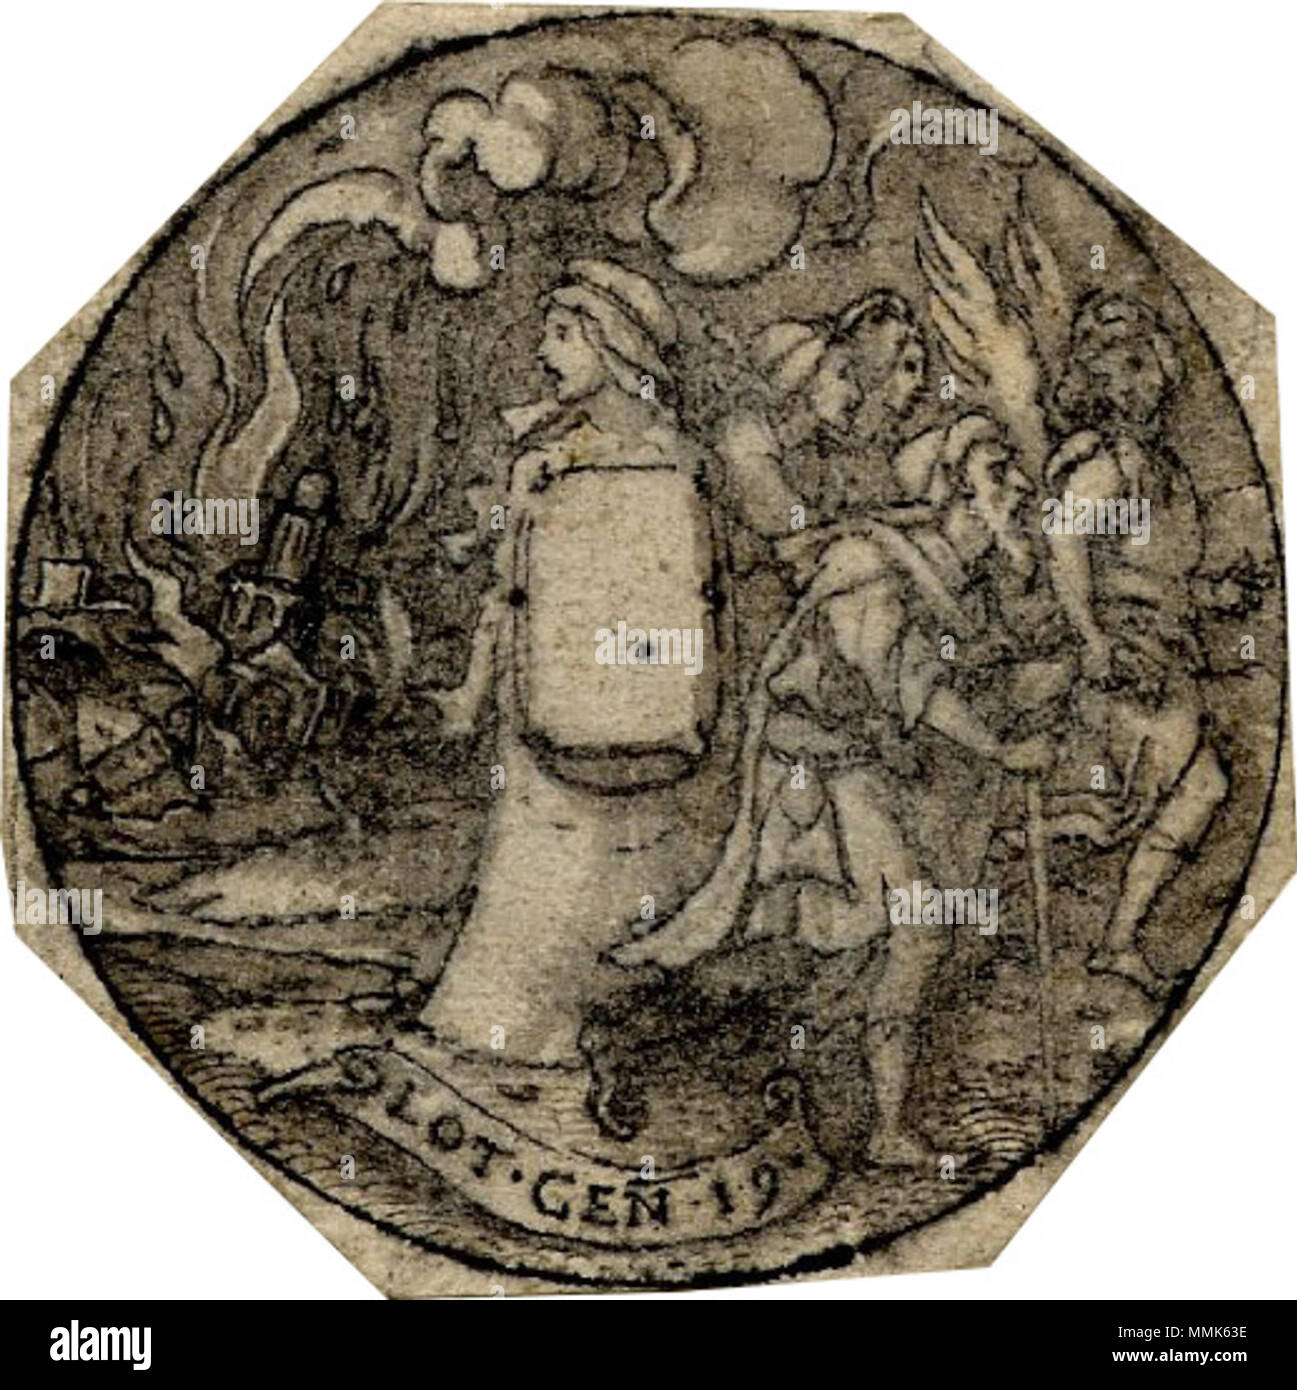 . English: Hans Holbein the Younger, Medallion with Lot's Wife, circa 1532–1543, pen and brown ink with grey wash on paper, 5.0 cm diameter (British Museum, museum number SL,5308.25).  . circa 1532–1543.   Hans Holbein  (1497/1498–1543)       Alternative names Hans Holbein der Jüngere, Hans Holbein  Description German painter and draughtsman  Date of birth/death 1497 or 1498 between 7 October 1543 and 29 November 1543  Location of birth/death Augsburg London  Work location Basel (1515-1526), Lucerne (1515-1526), Venice (1515), Bologna (1515), Florence (1515), Rome (1515), Venice (1517-1518), B Stock Photo